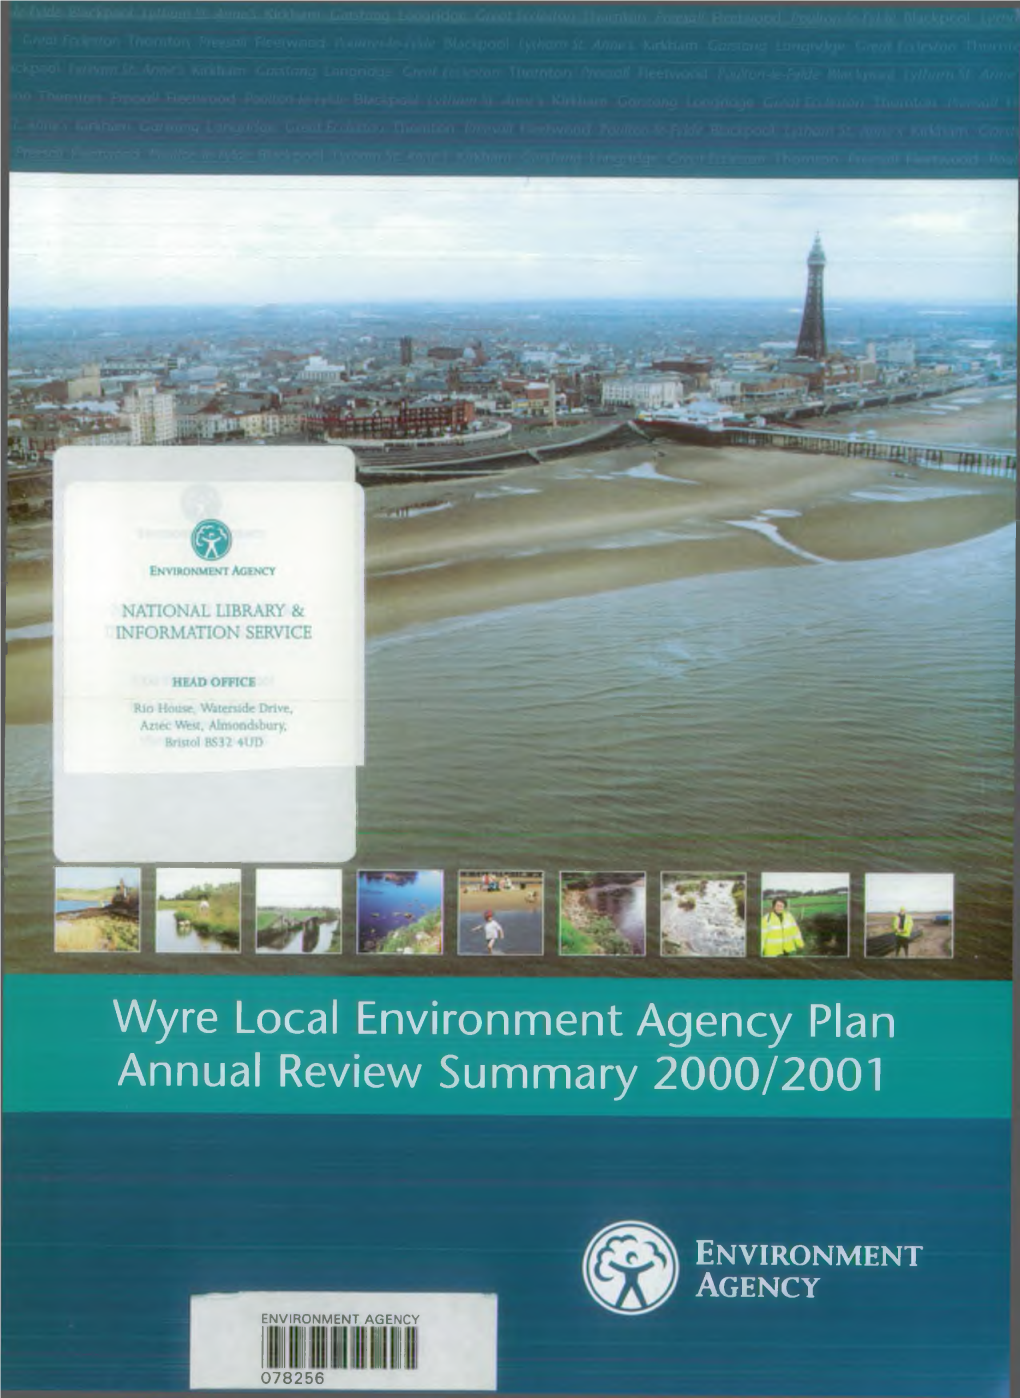 Wyre Local Environment Agency Plan Annual Review Summary 2000/2001